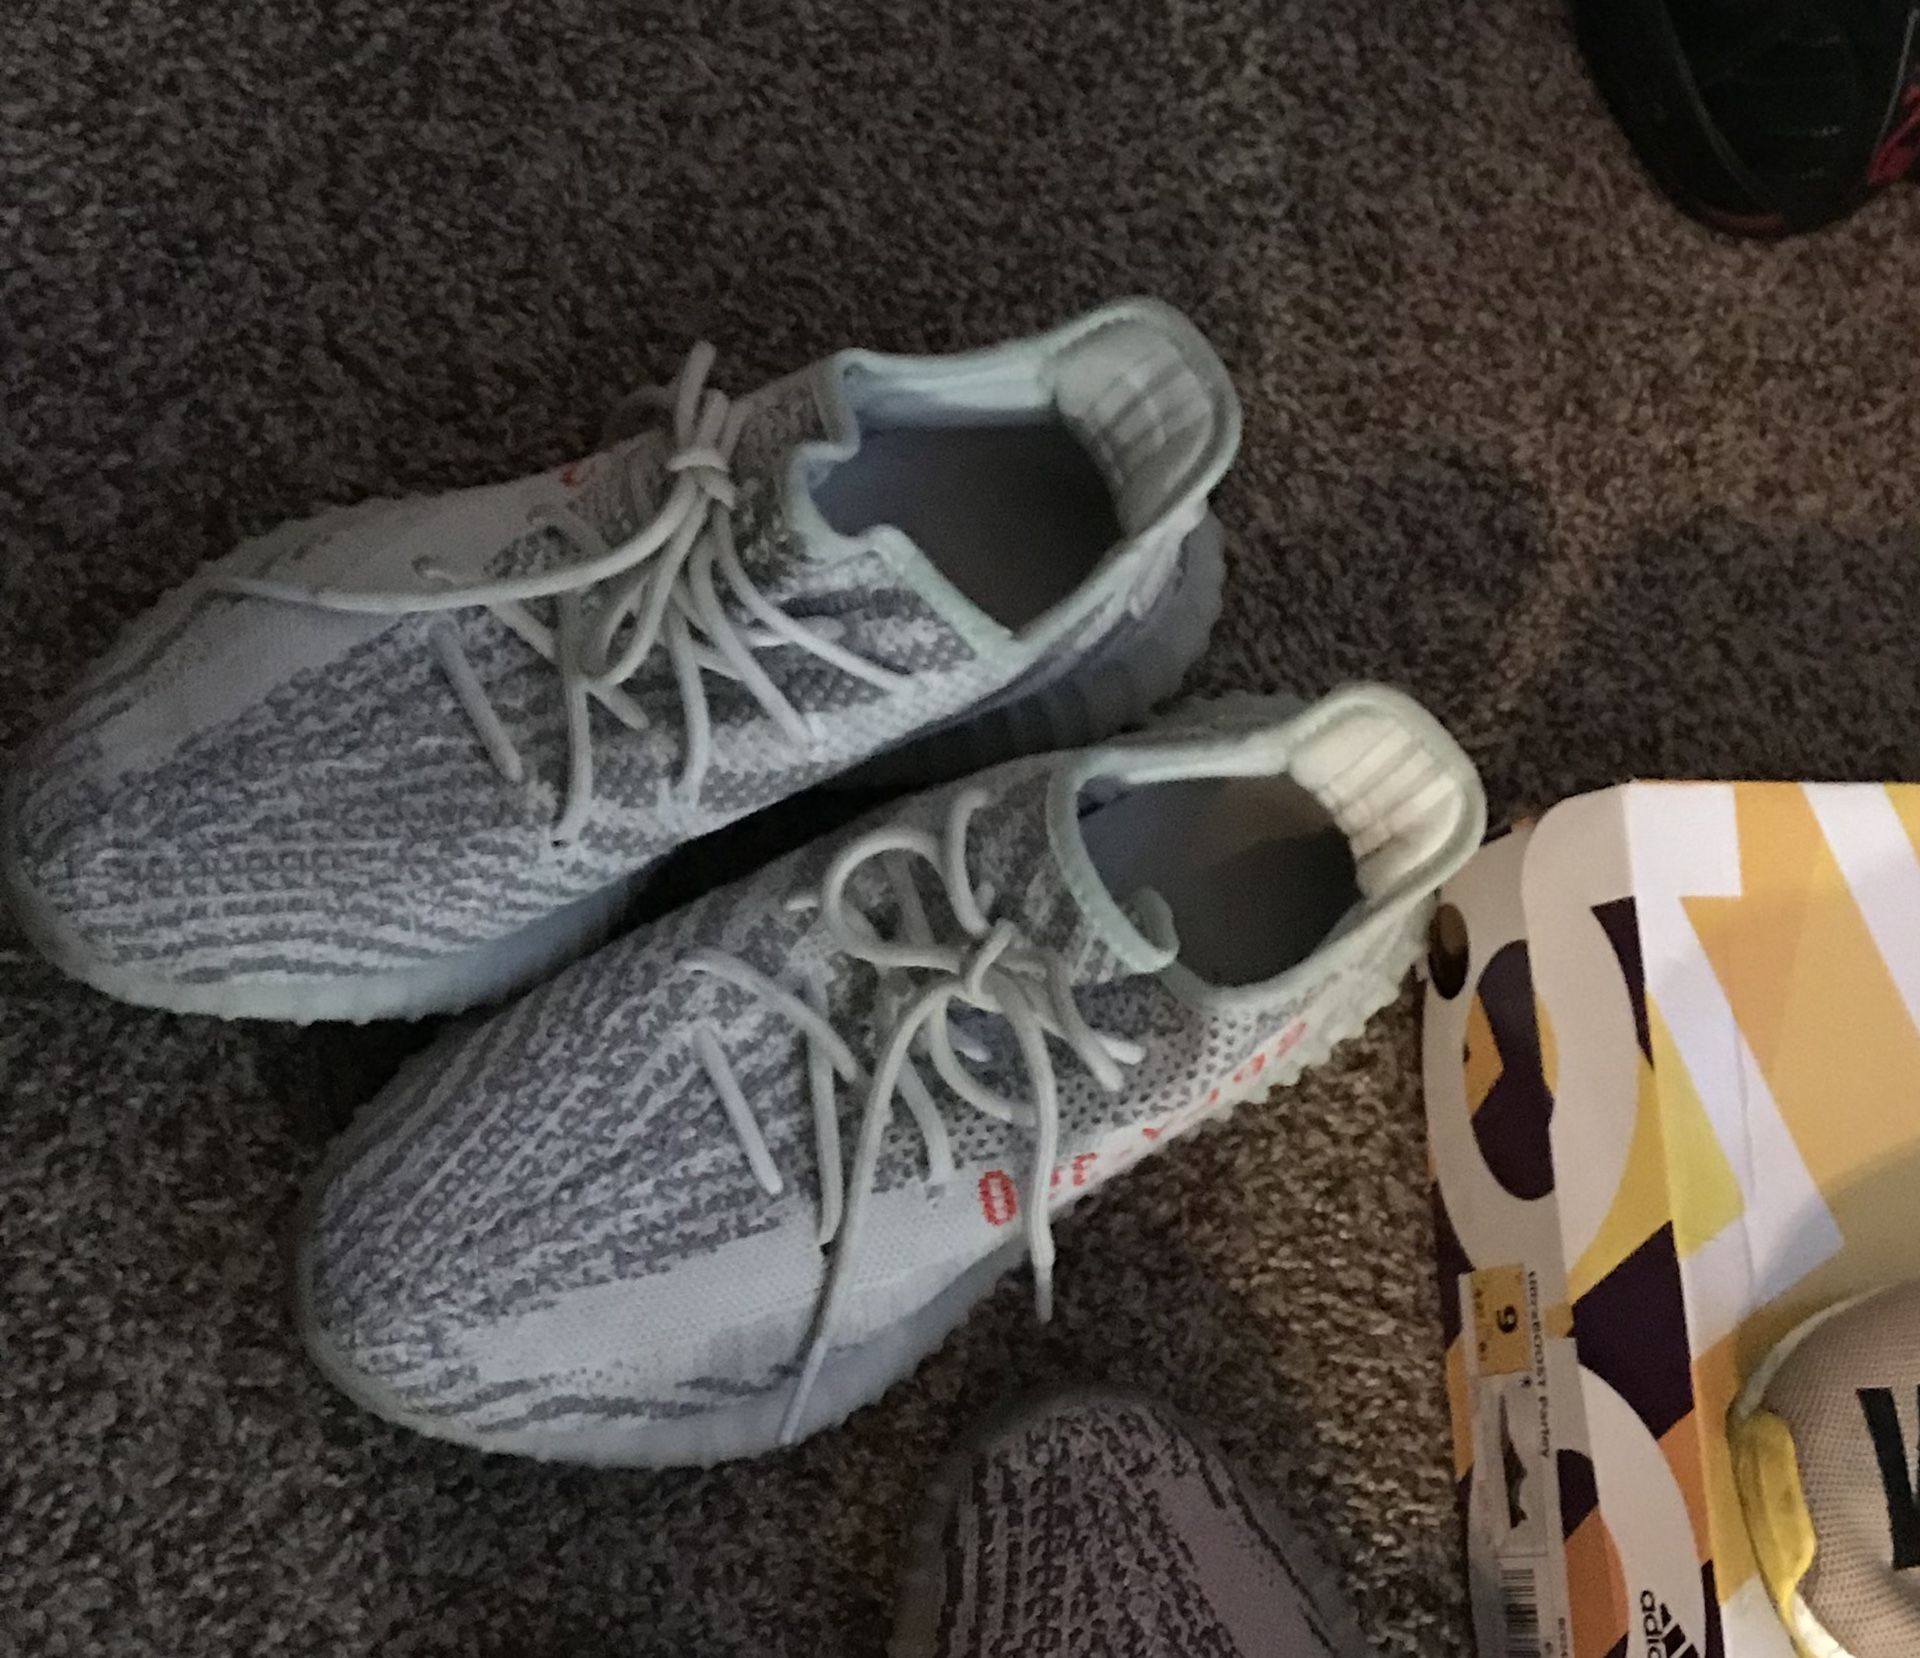 Yeezy Adidas 350 Boost V2 “Blue Tint” colorway